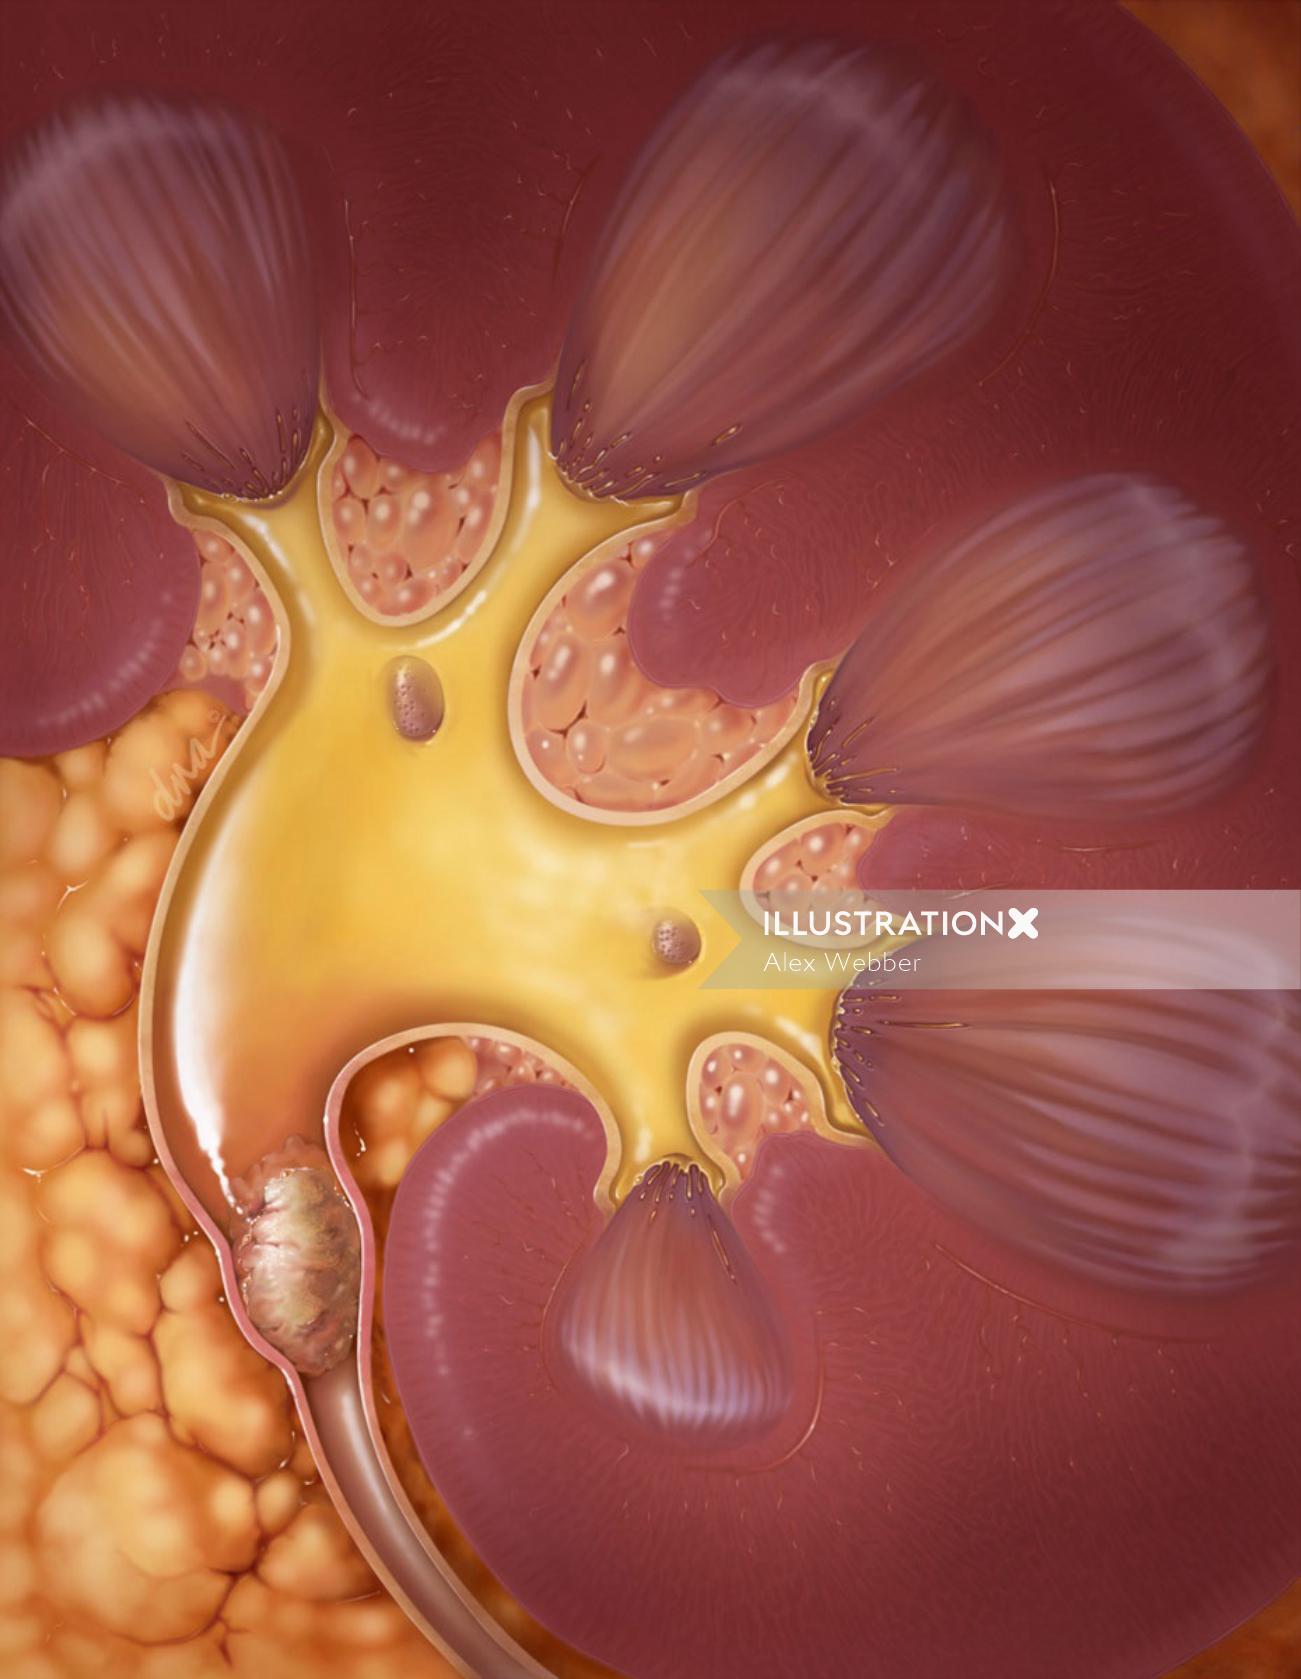 An illustration of kidney stone in the proximal ureter